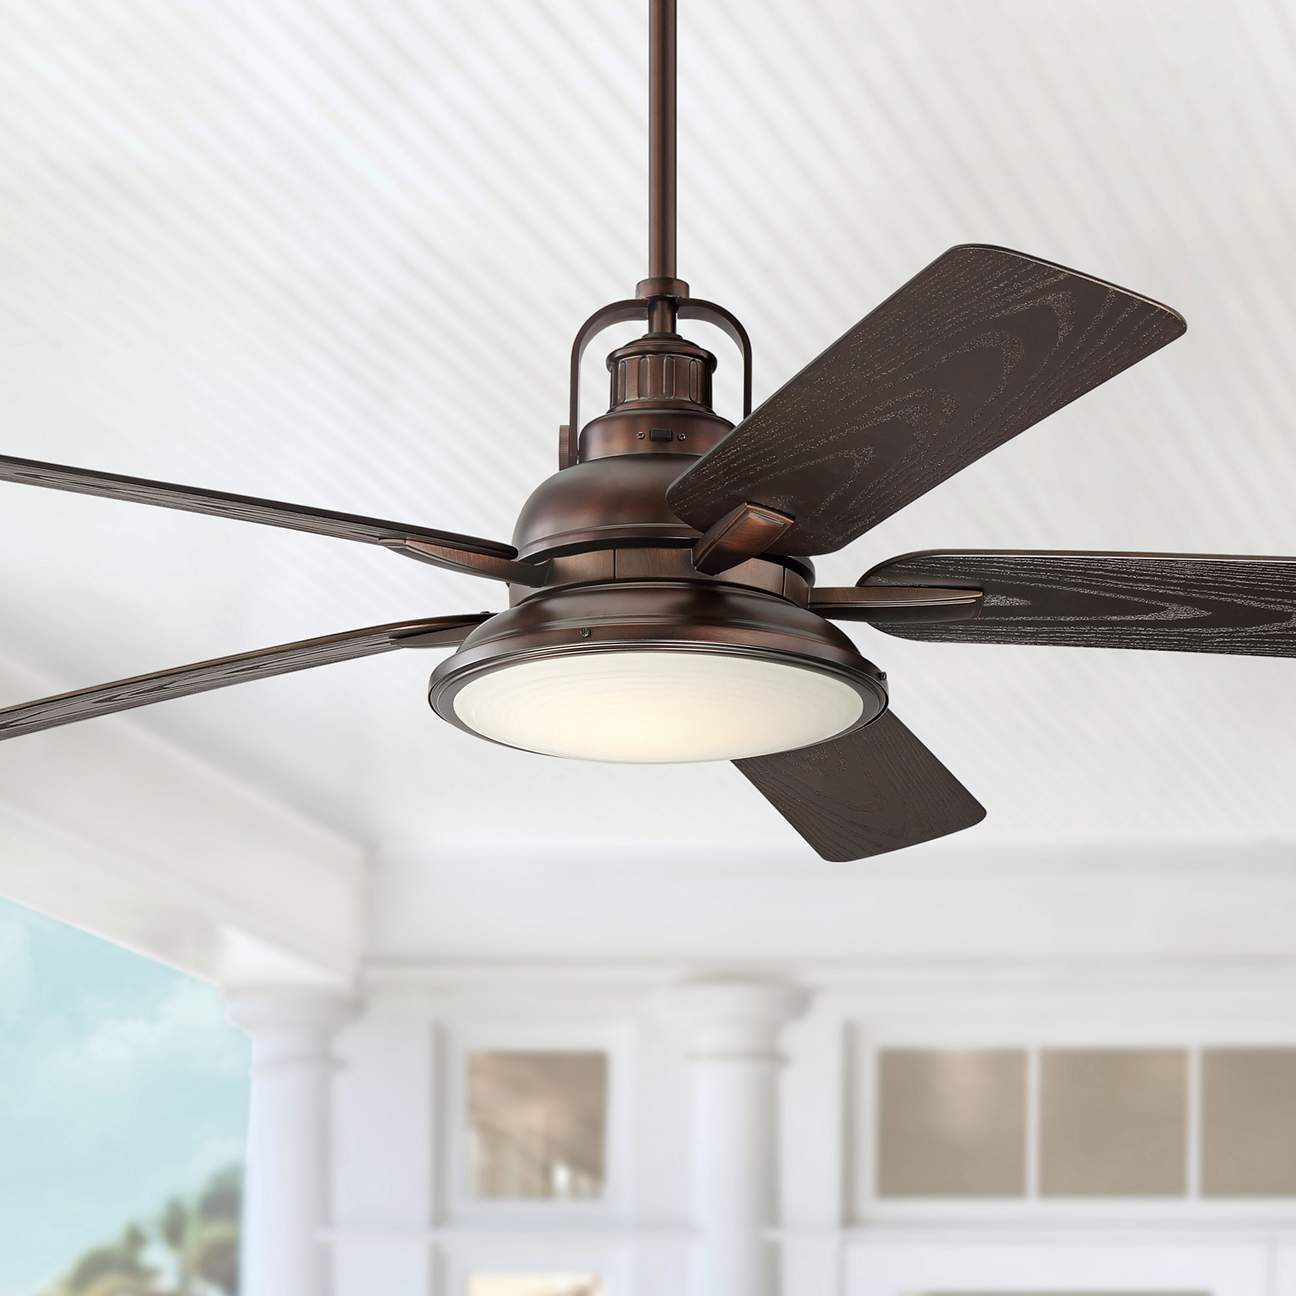 60 Inch Wind And Sea Bronze Finish Led Outdoor Ceiling Fan With Remote  24j52cropped ?qlt=65&wid=1296&hei=1296&op Sharpen=1&fmt=jpeg